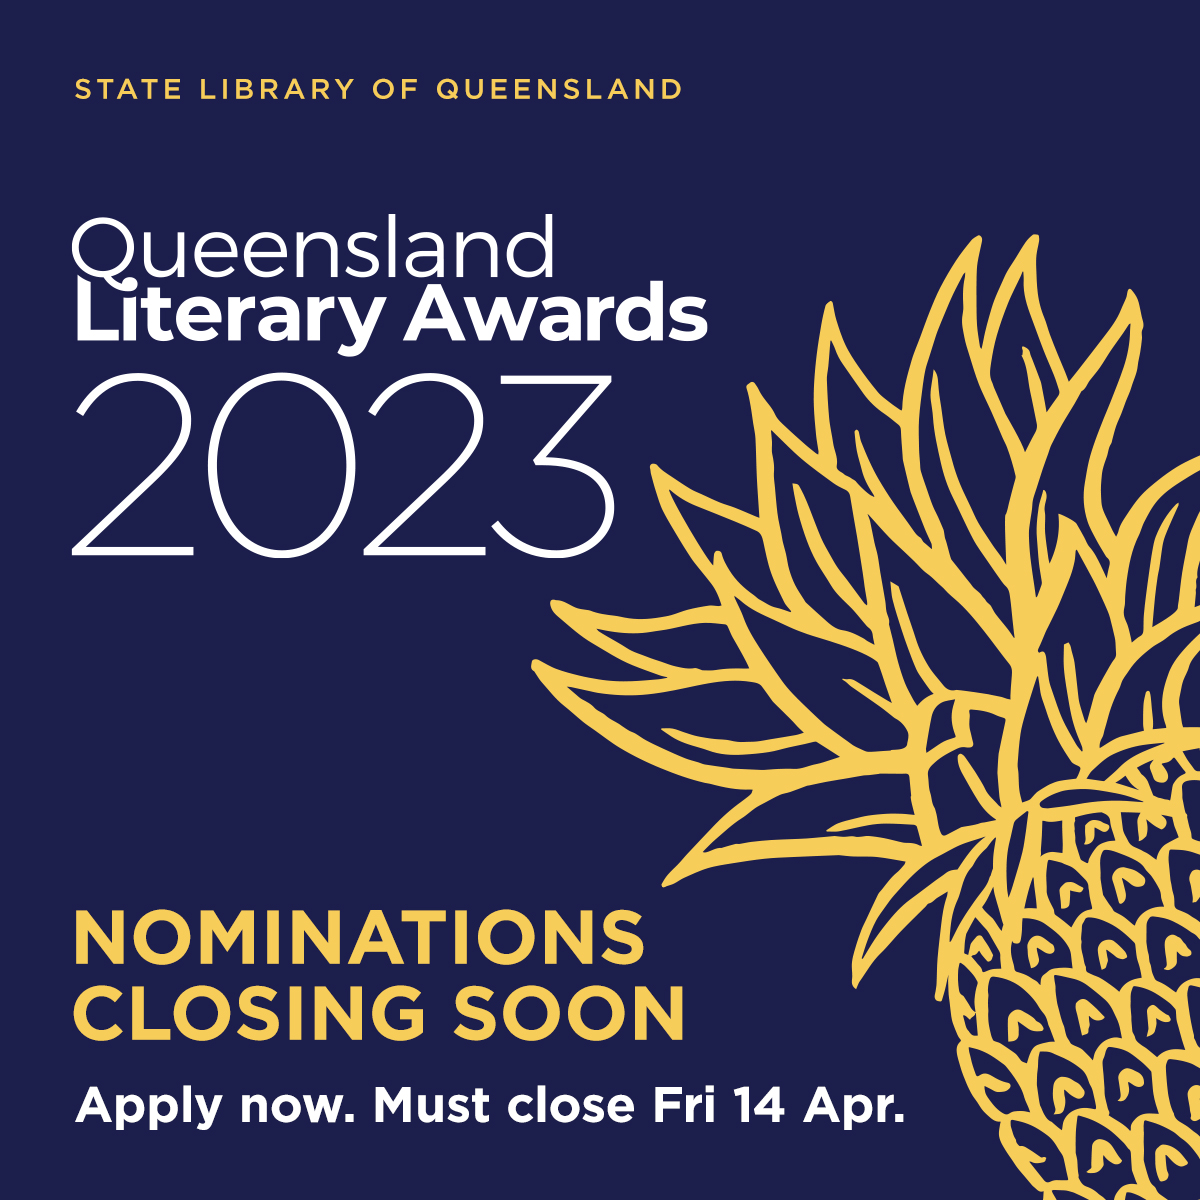 Nominations for the @QldLitAwards  close at 5pm AEST on Friday 14 April. Cash prizes are on offer for published books, & publication opportunities for unpublished manuscripts as well as professional development for writers.
Visit slq.qld.gov.au/qla for info
@slqld